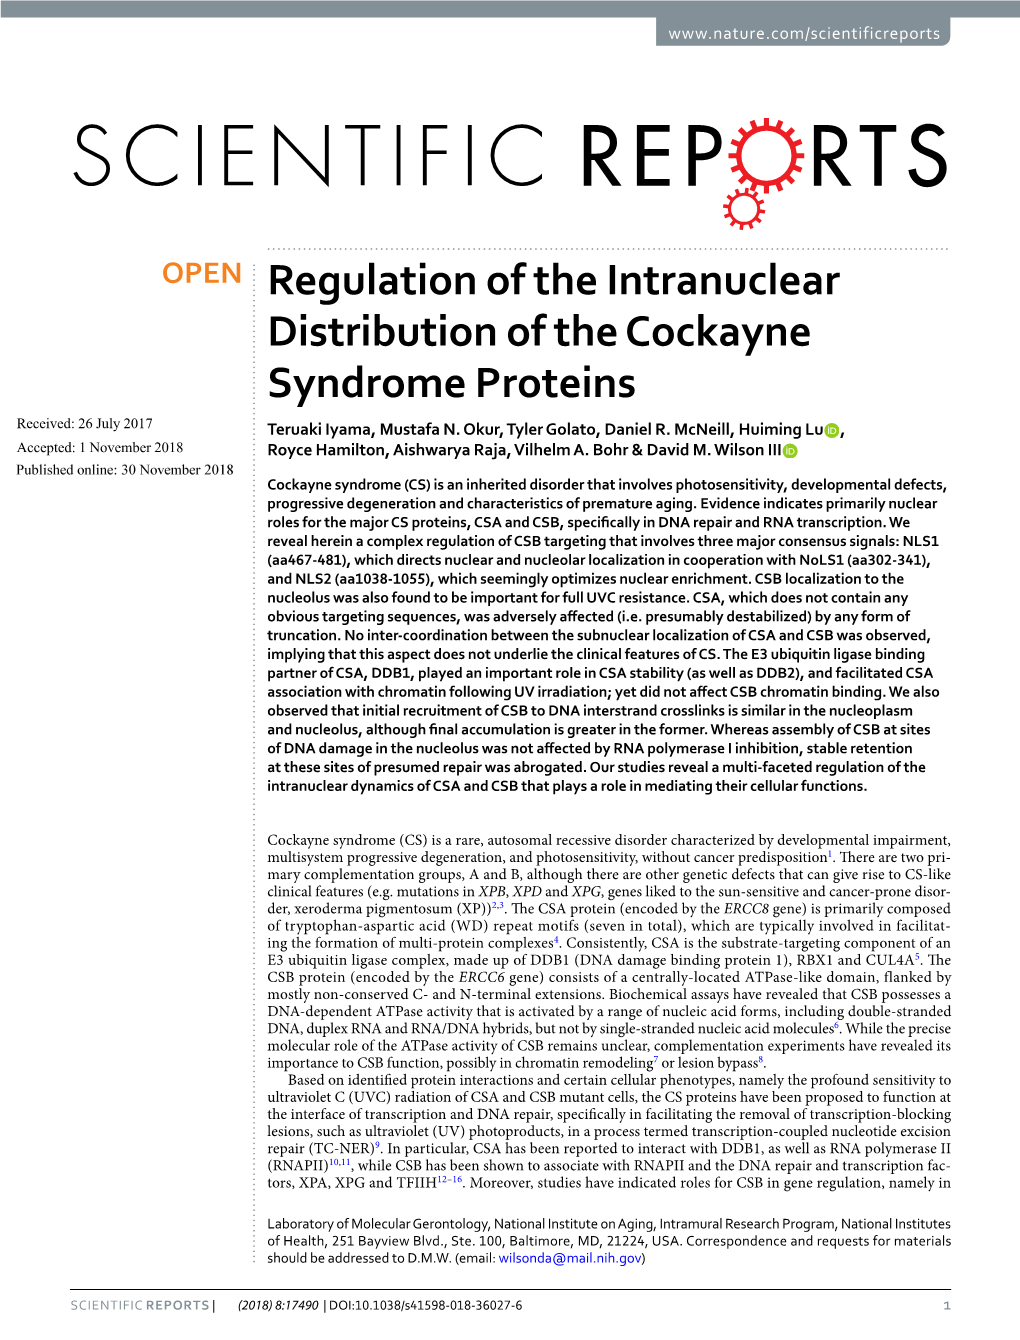 Regulation of the Intranuclear Distribution of the Cockayne Syndrome Proteins Received: 26 July 2017 Teruaki Iyama, Mustafa N